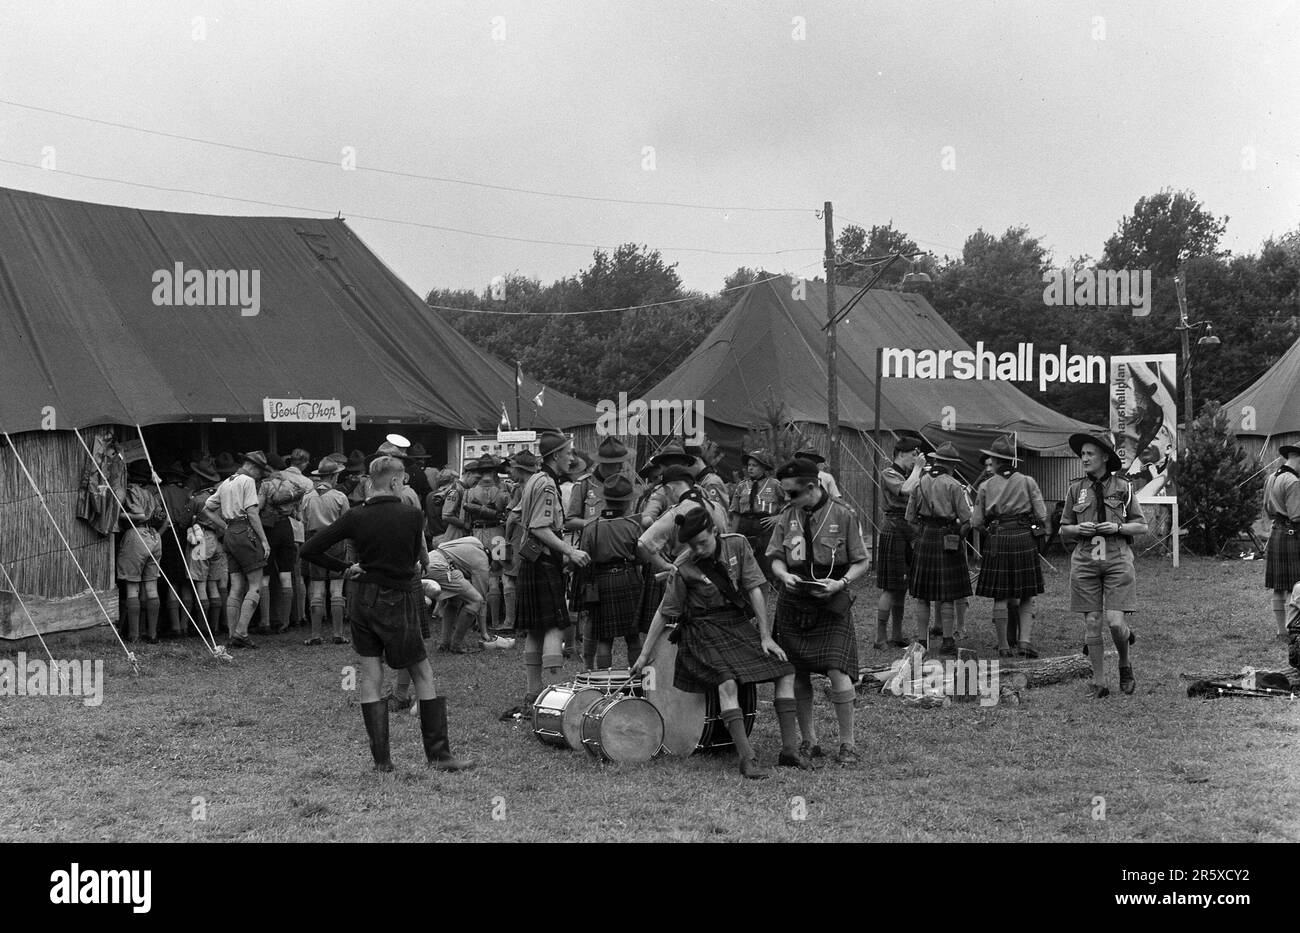 A Dutch Scout Camp on August 1 1950, set up with funds from the Marshall Plan. The Marshall Plan was a very ambitious financial aid program proposed by US Secretary of State George Marshall. He understood that a destroyed and prostrate Europe had to have financial help if it were to recover and to remove the threat of communist insurgency. The aid was given not lent and each country decided on how it would use the funds. In the three years of the program the US gave Europe $13 billion, a colossal sum worth $175 billion at todays values. This far-seeing and generous plan was a major factor in r Stock Photo